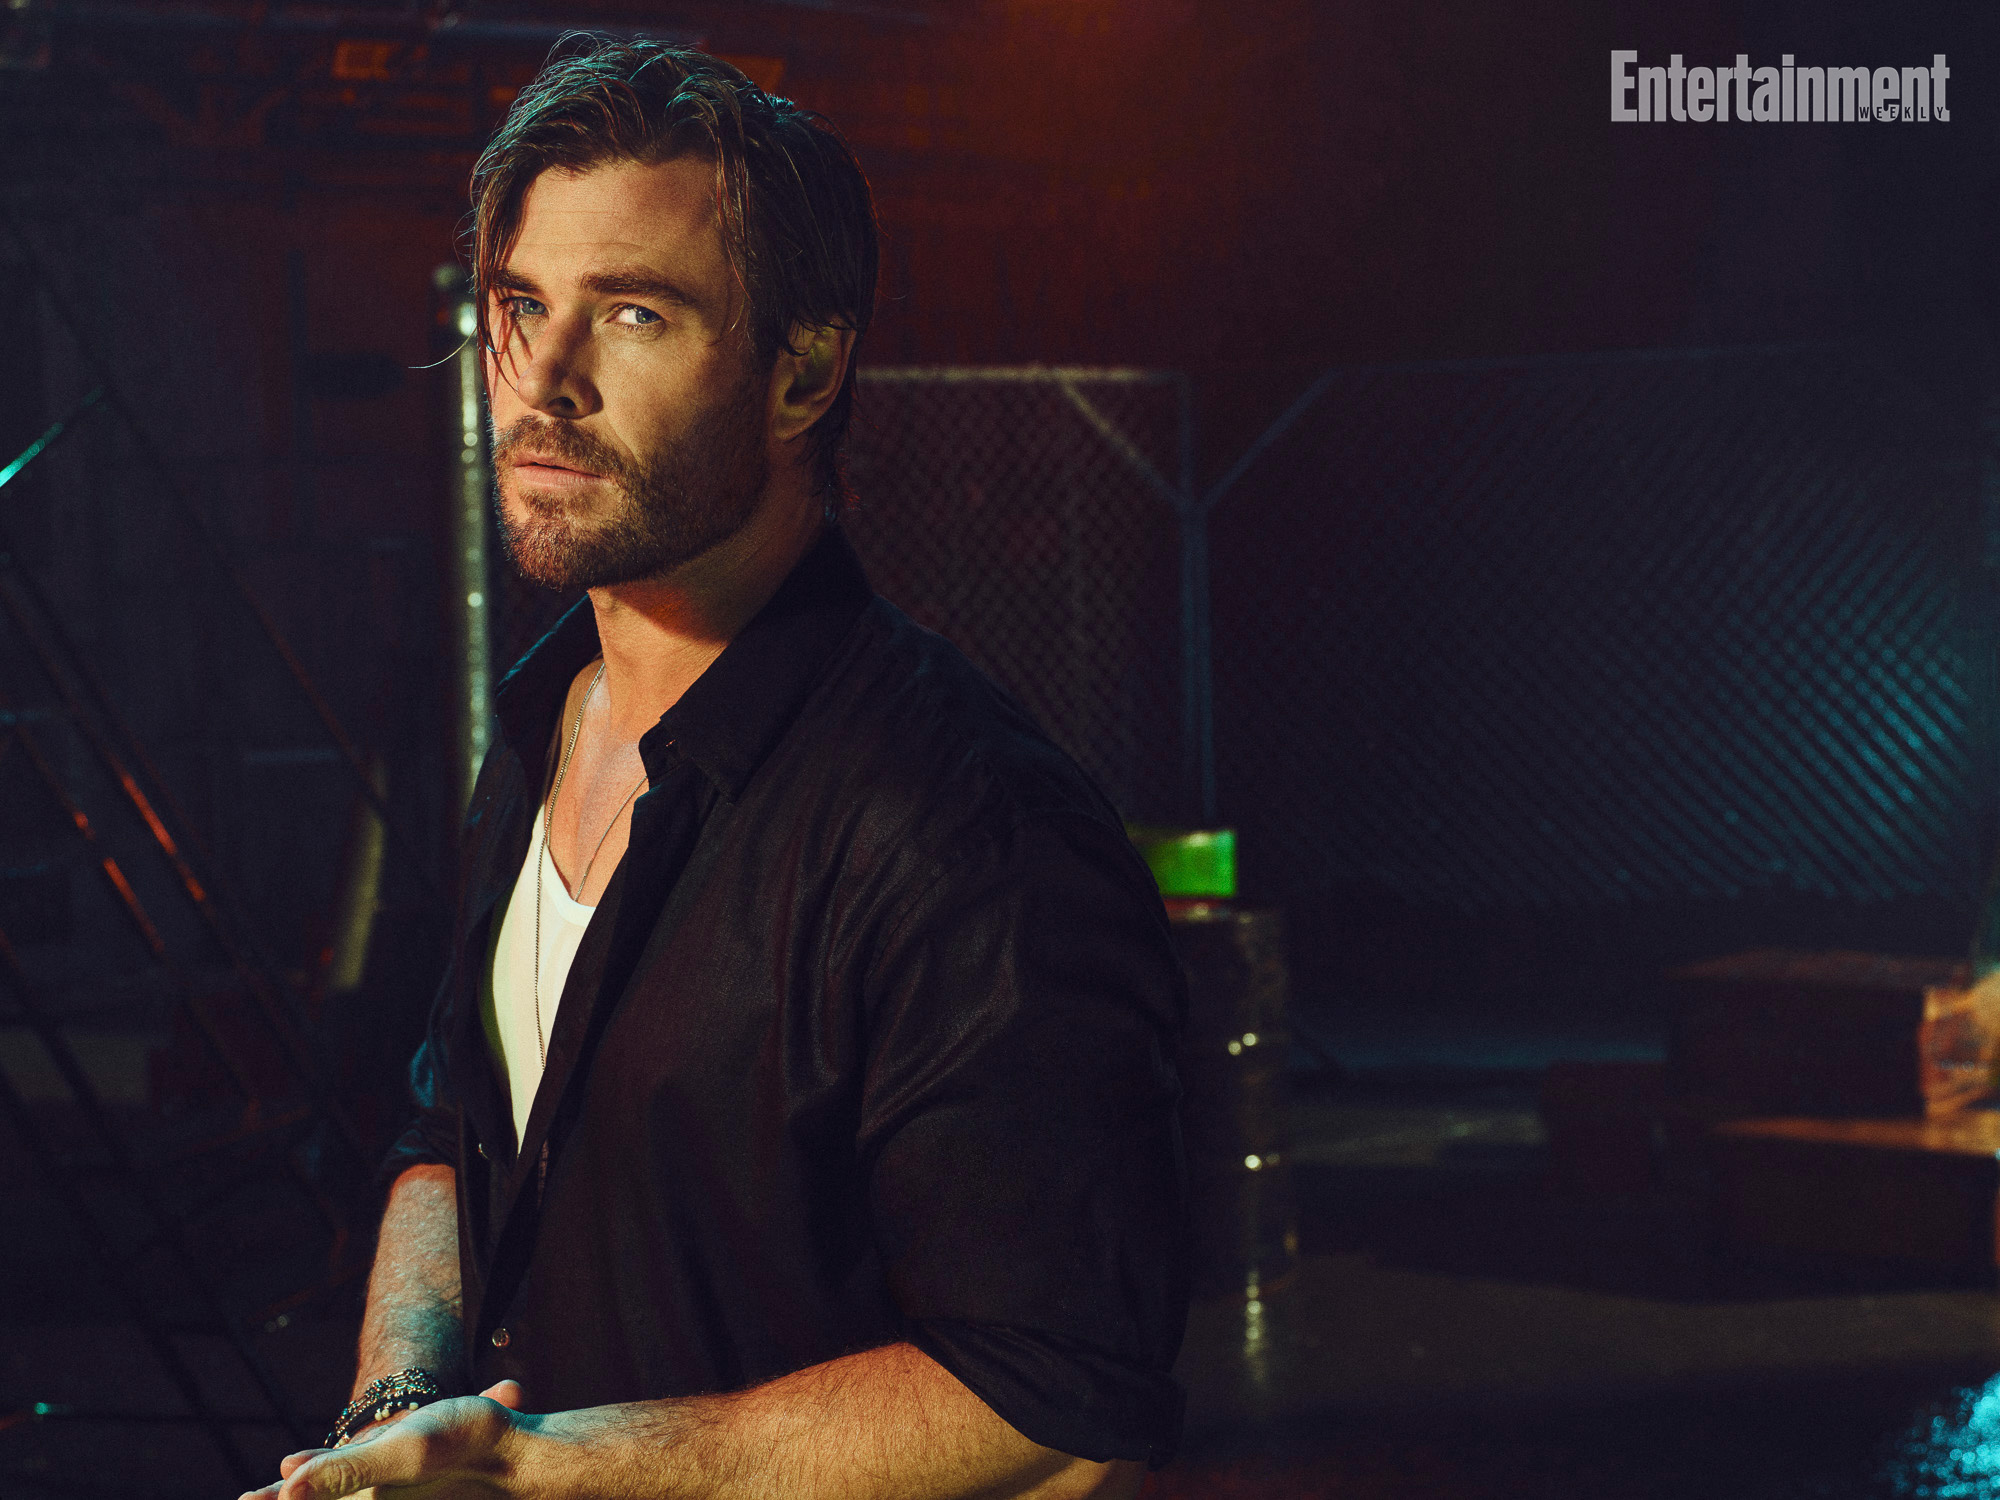 Extraction 2's Chris Hemsworth on his family, future, and fiery action sequel